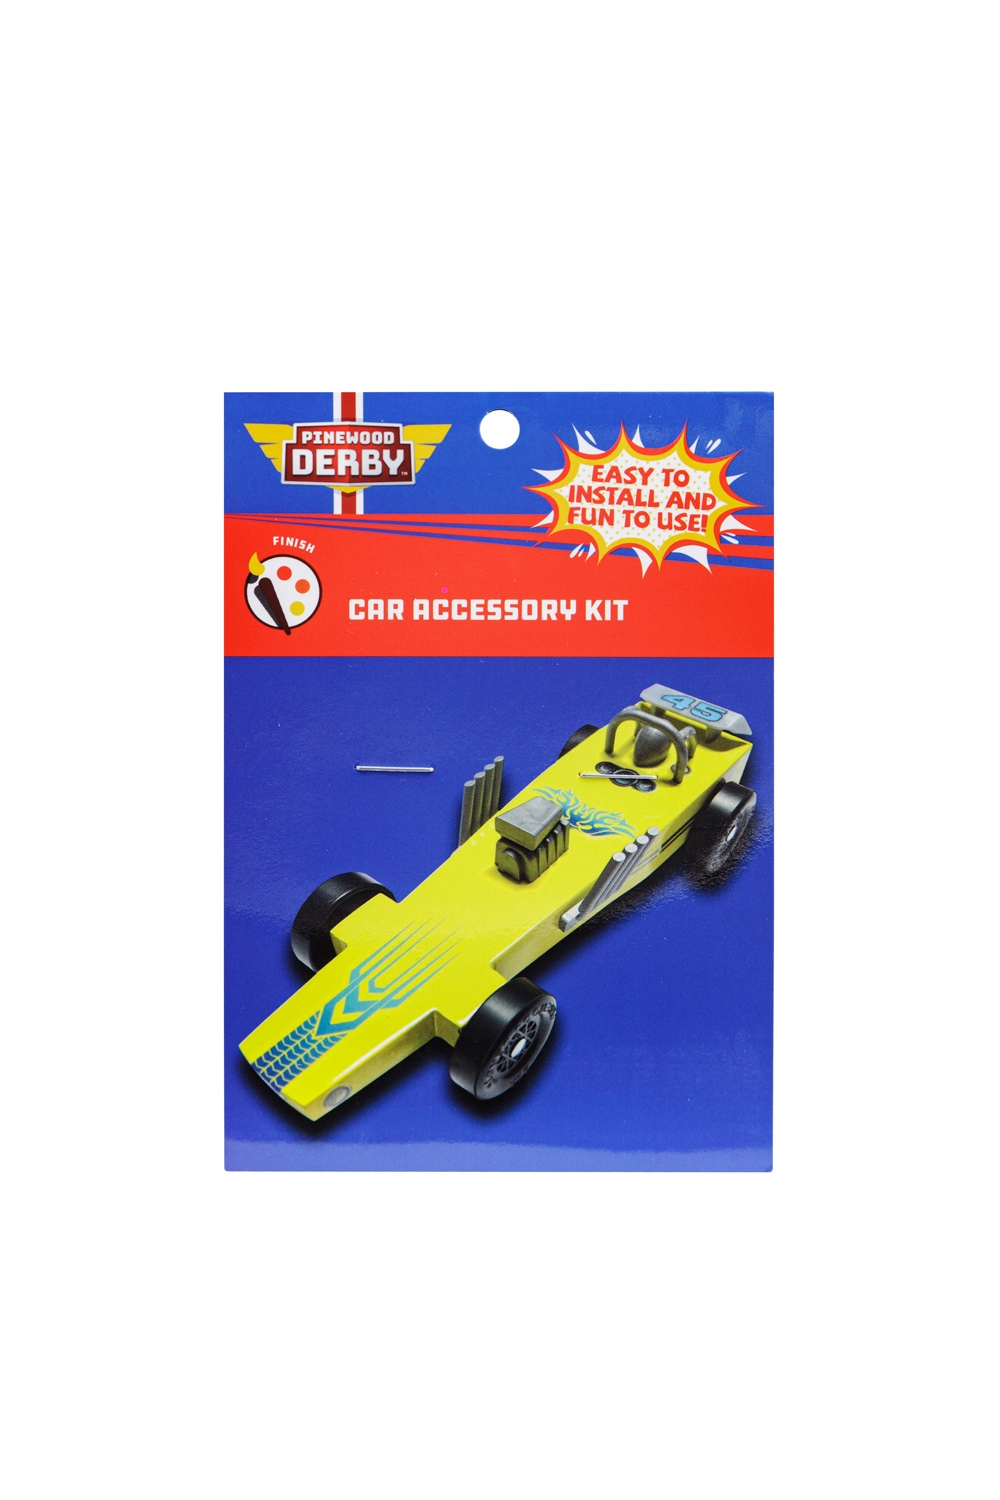  BSA Pinewood Derby Car Accessories Kit, Race Car - 6 Piece  Racing Accessories for PWD Car Boy Scouts of America : Arts, Crafts & Sewing